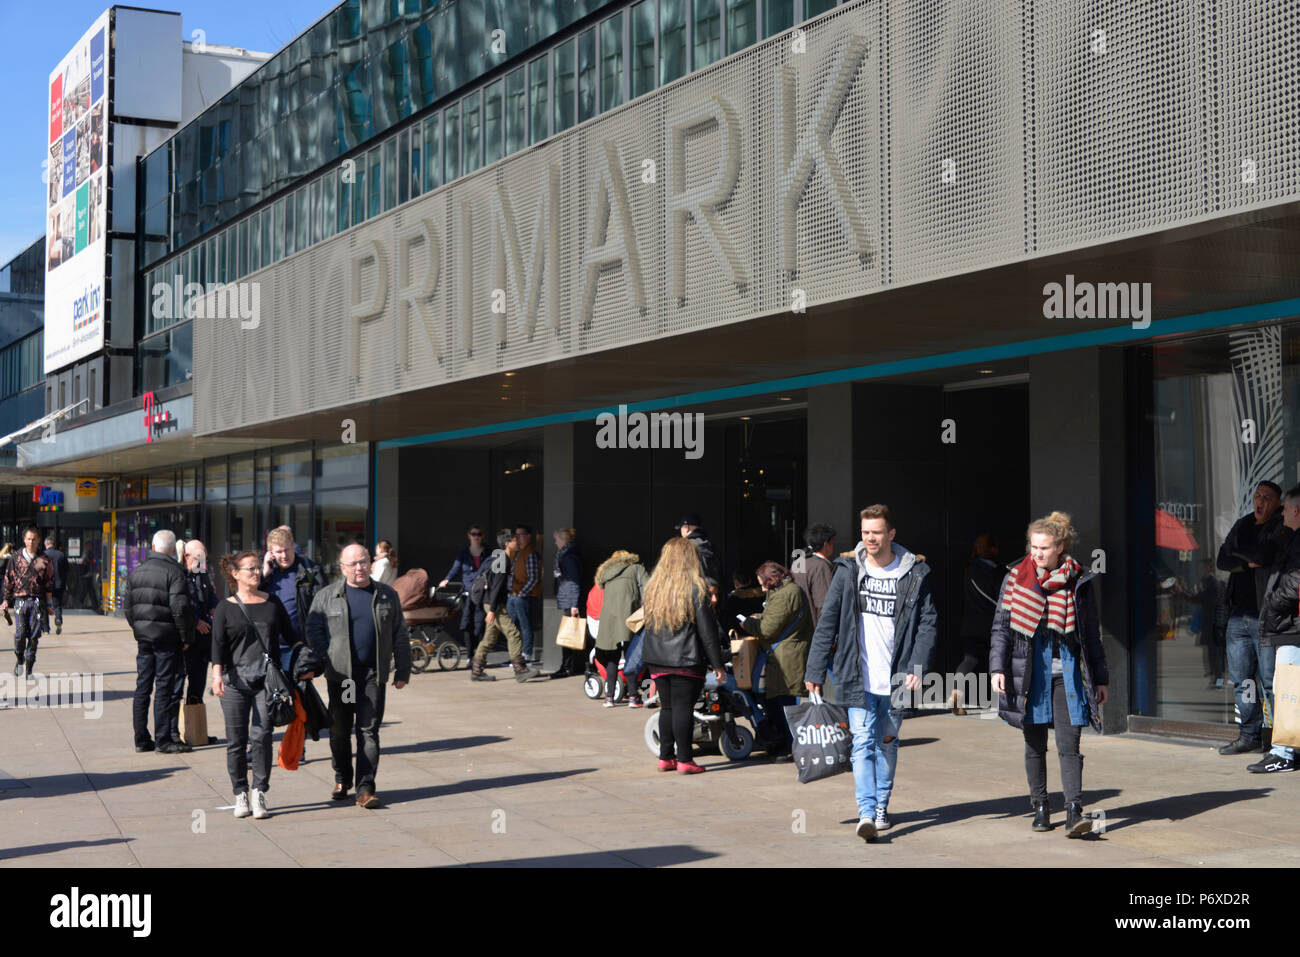 Berlin Shops Store High Resolution Stock Photography and Images - Alamy